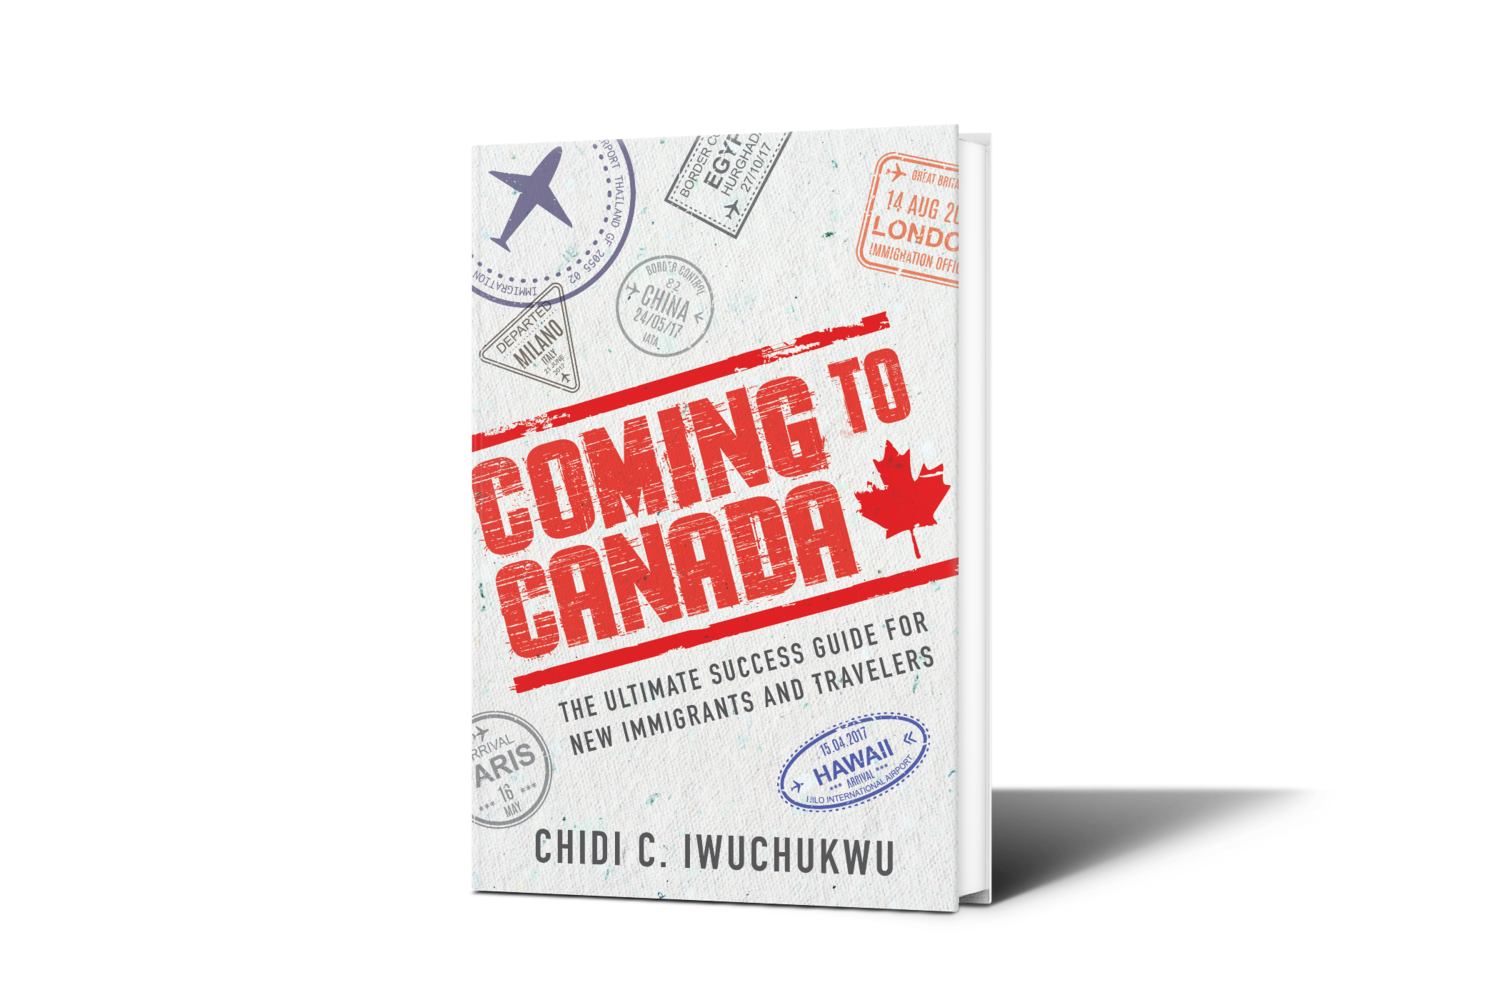 Coming To Canada: The Ultimate Success Guide for New Immigrants and Travelers